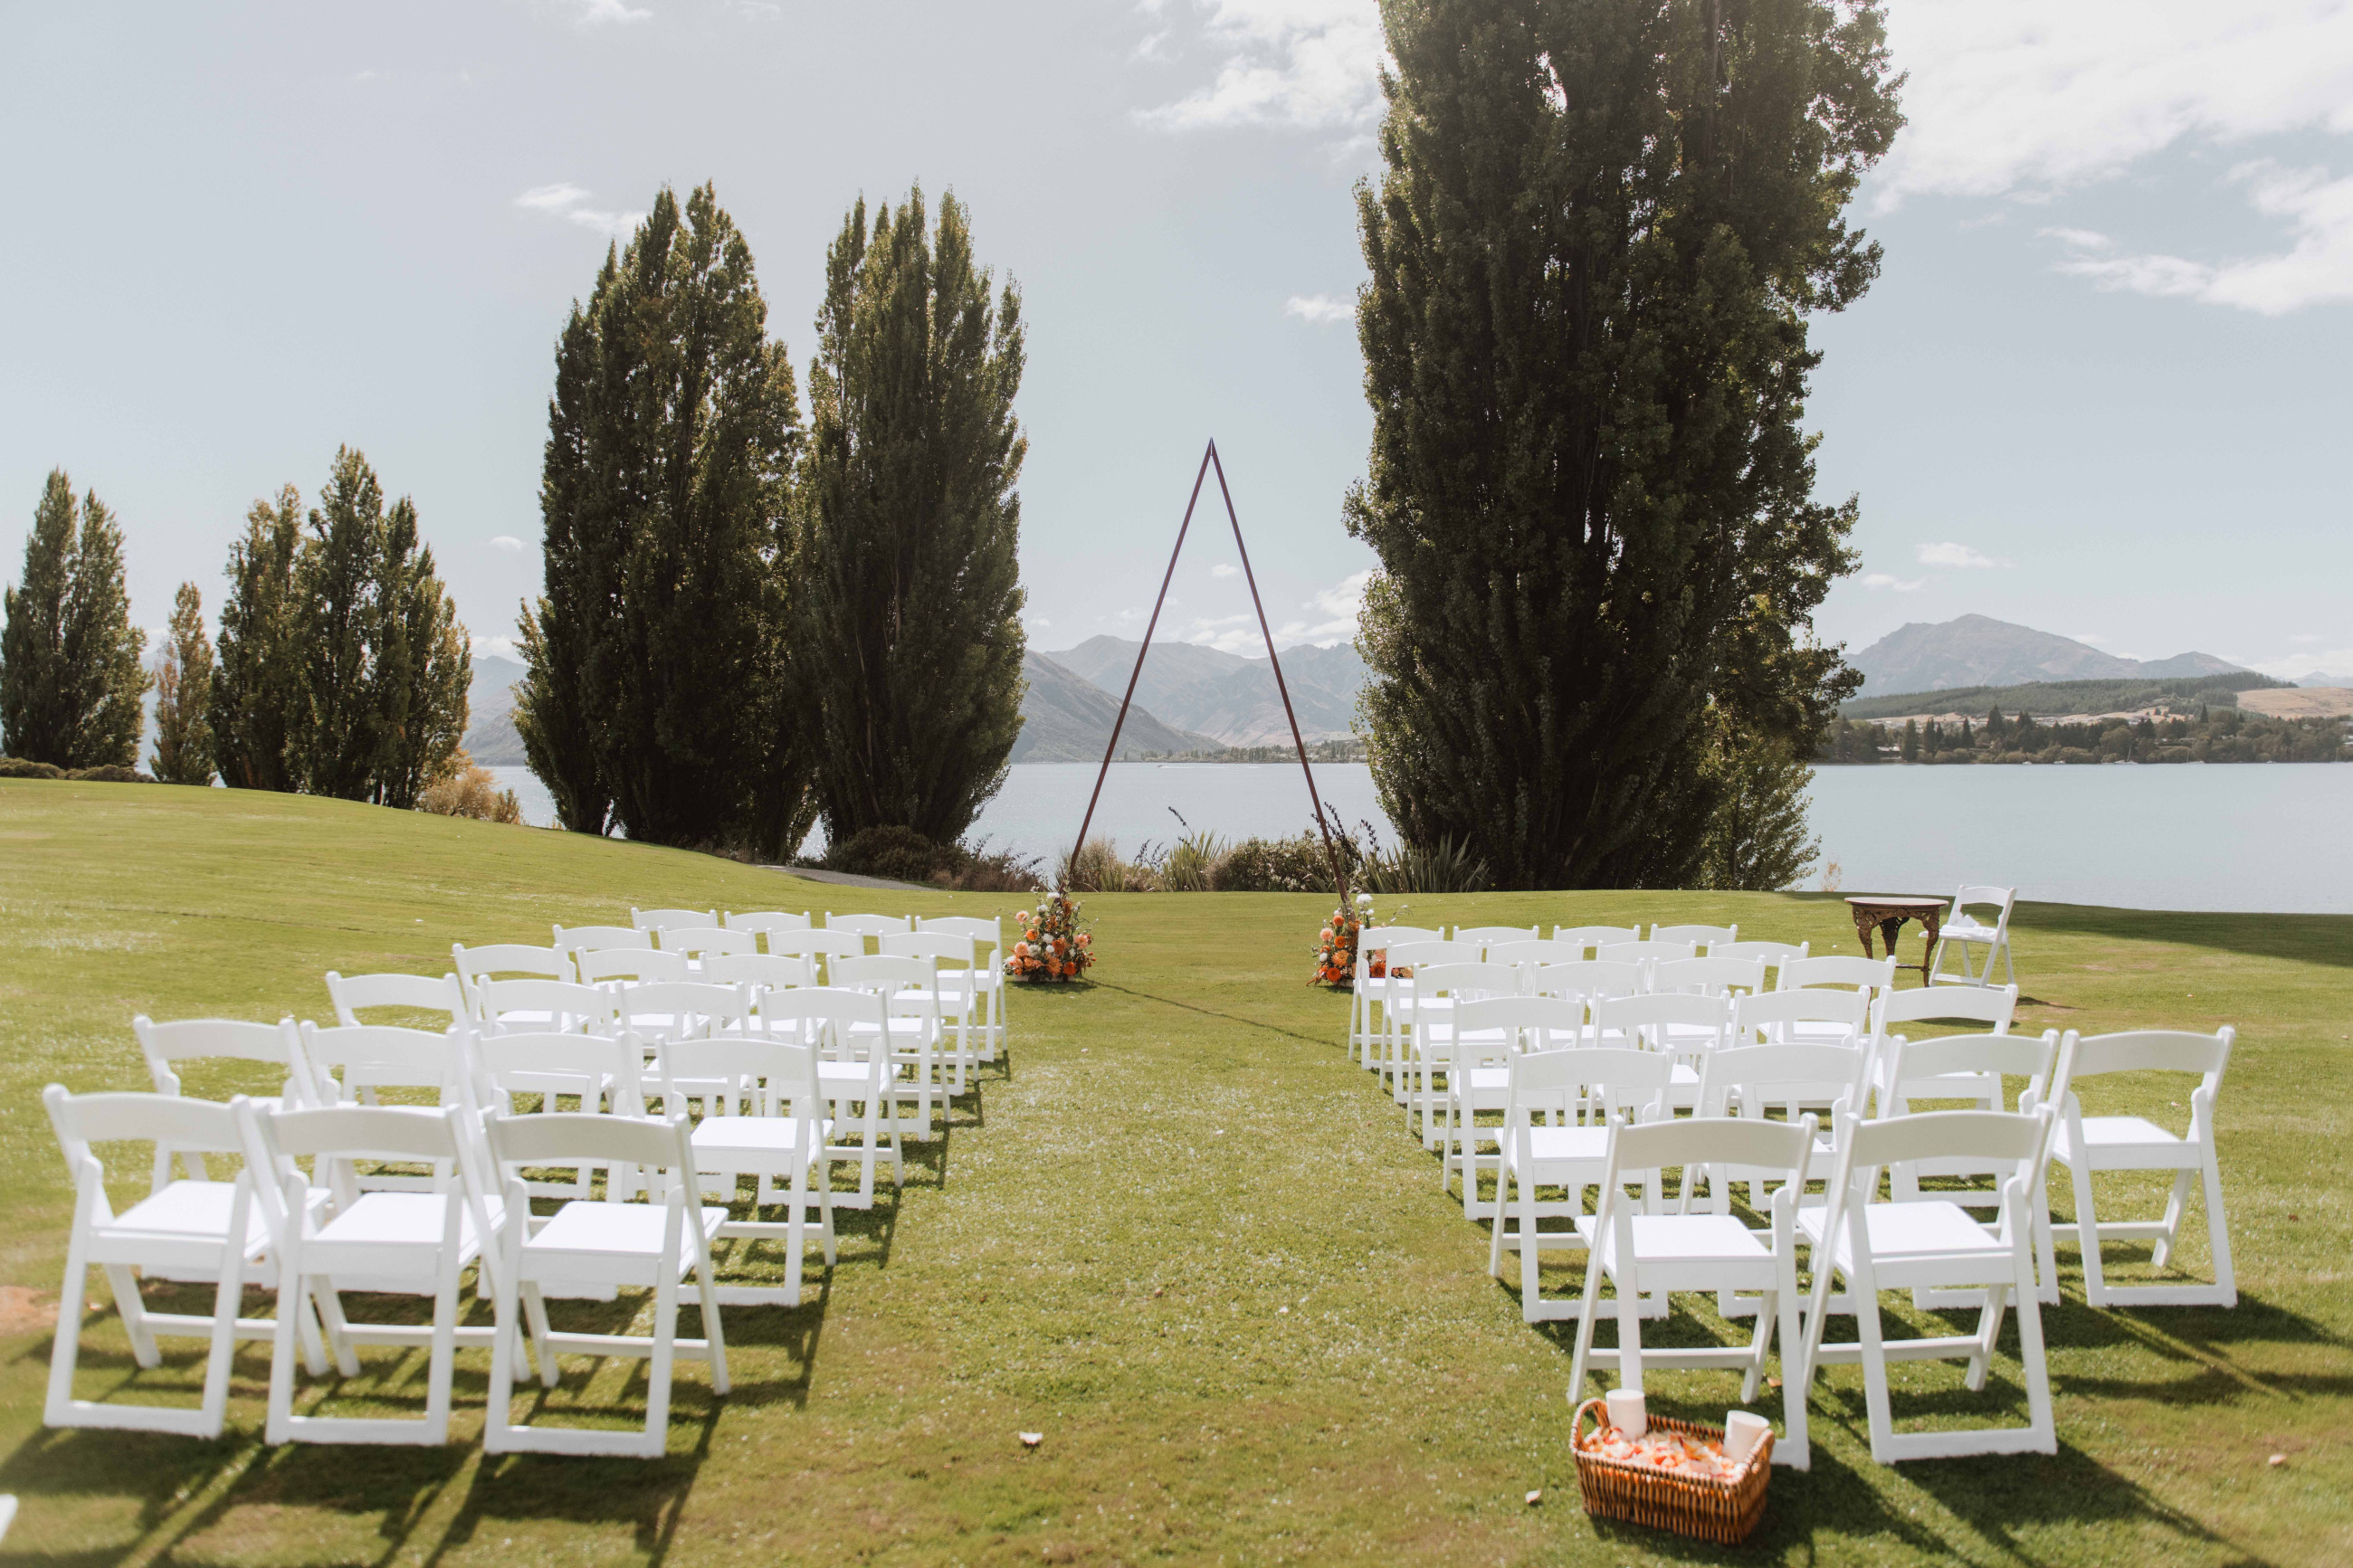 A selection of enchanting wedding venues in New Zealand, showcasing diverse locations and settings for your special day.